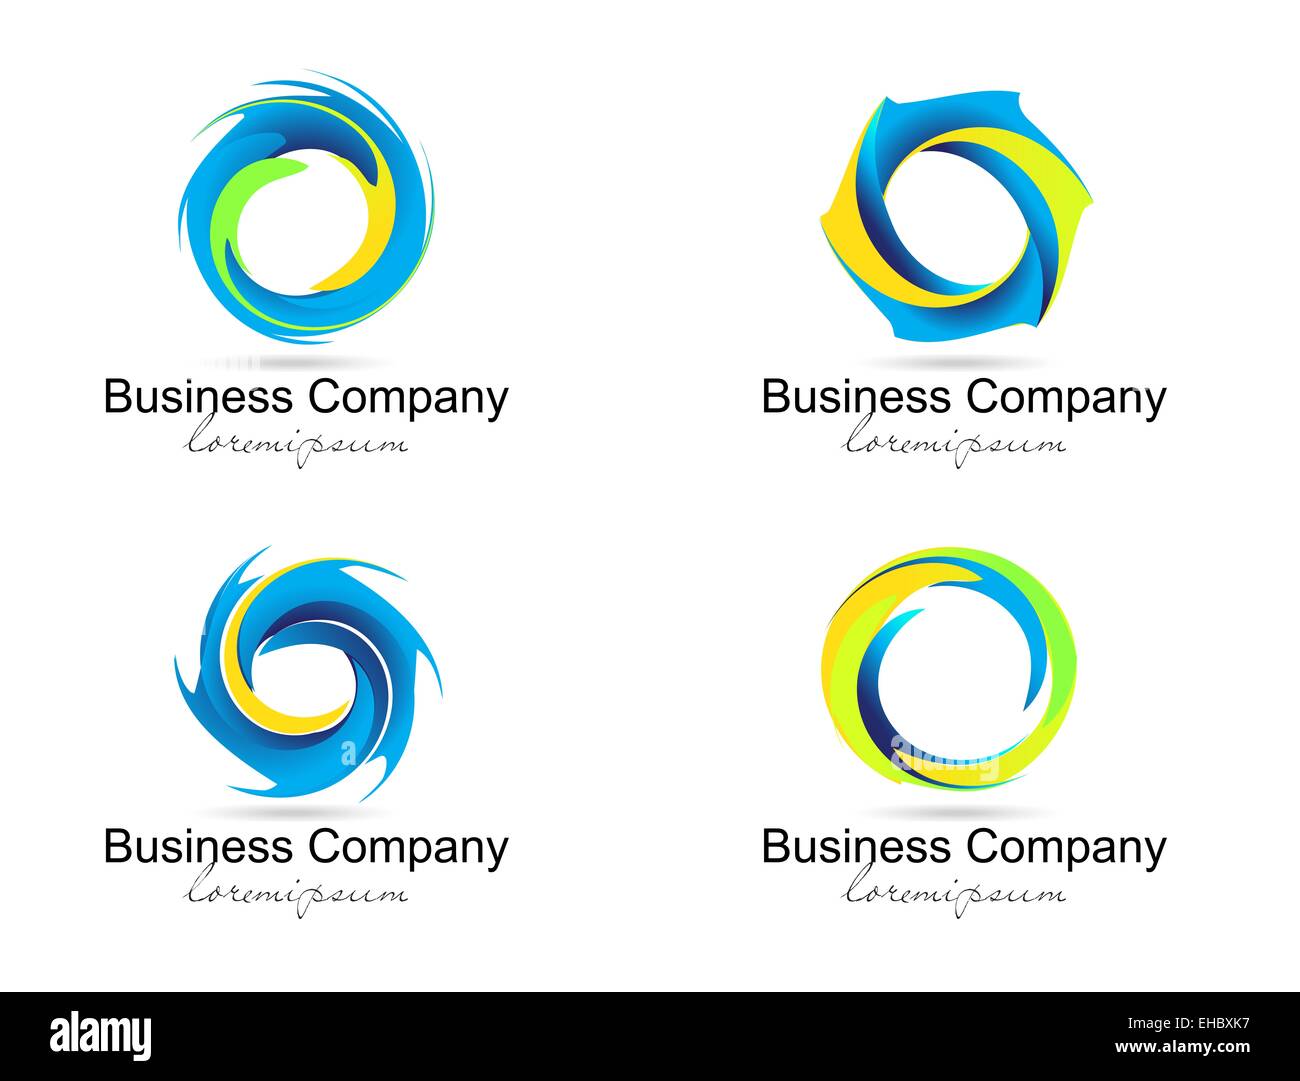 Corporate Business Logo. Creative vector spiral and circles. Stock Photo